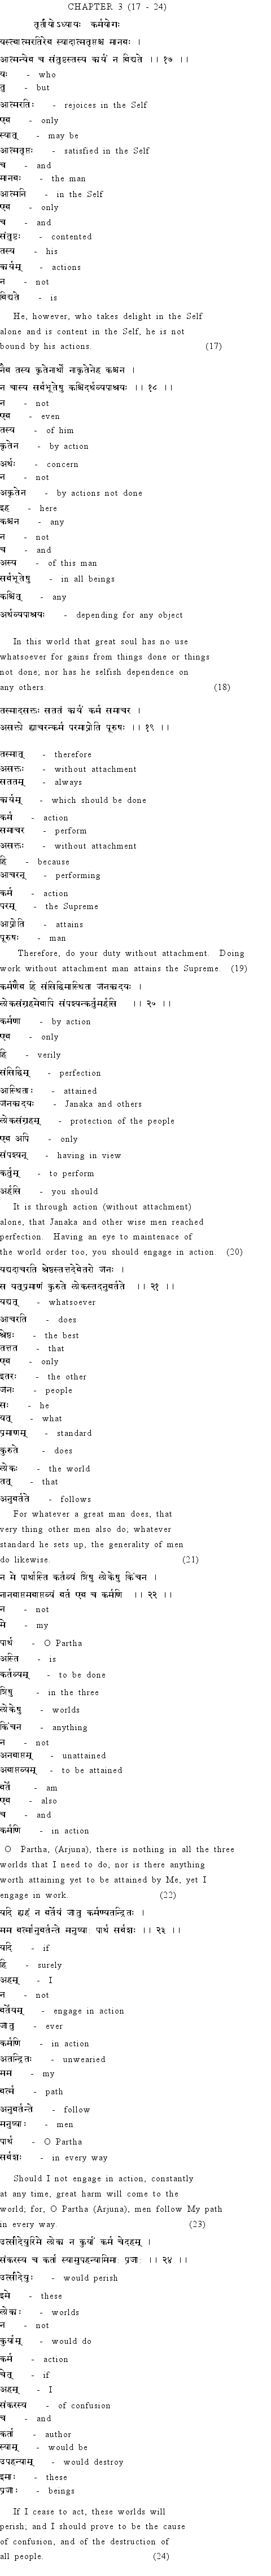 Text of Ch.3_3